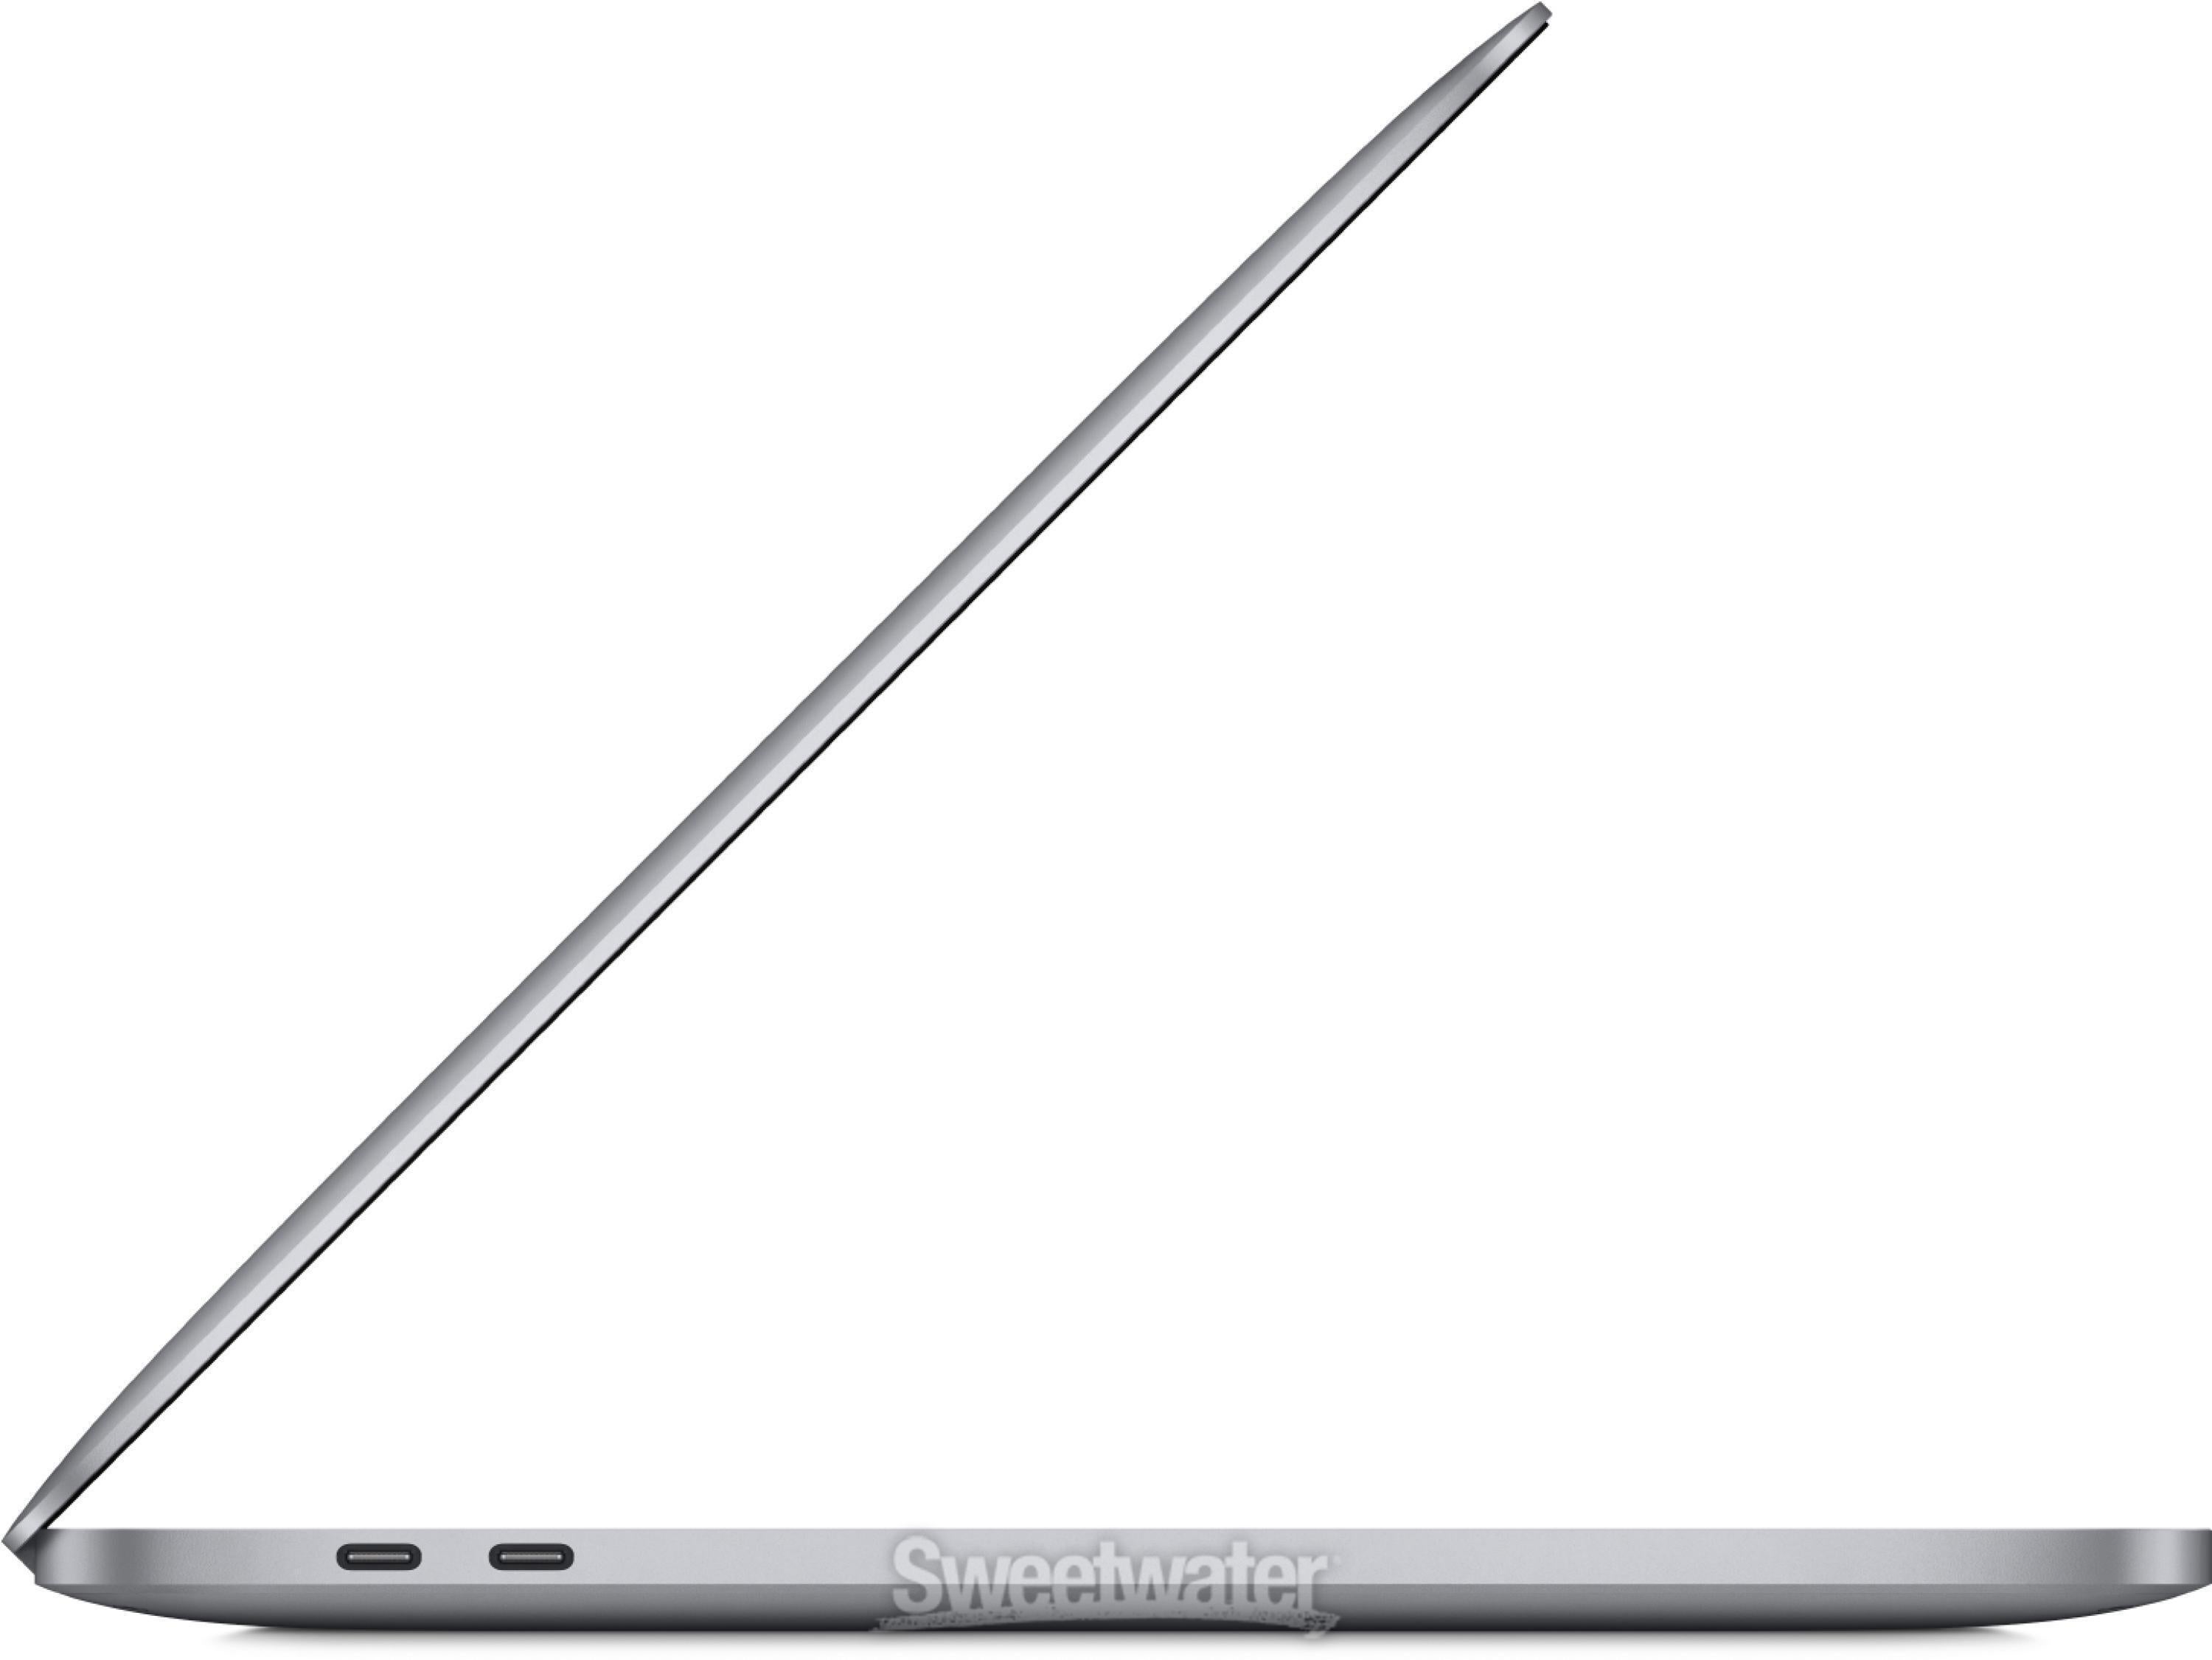 Apple 13-inch MacBook Pro Apple M1 chip with 8-core CPU and 8-core 